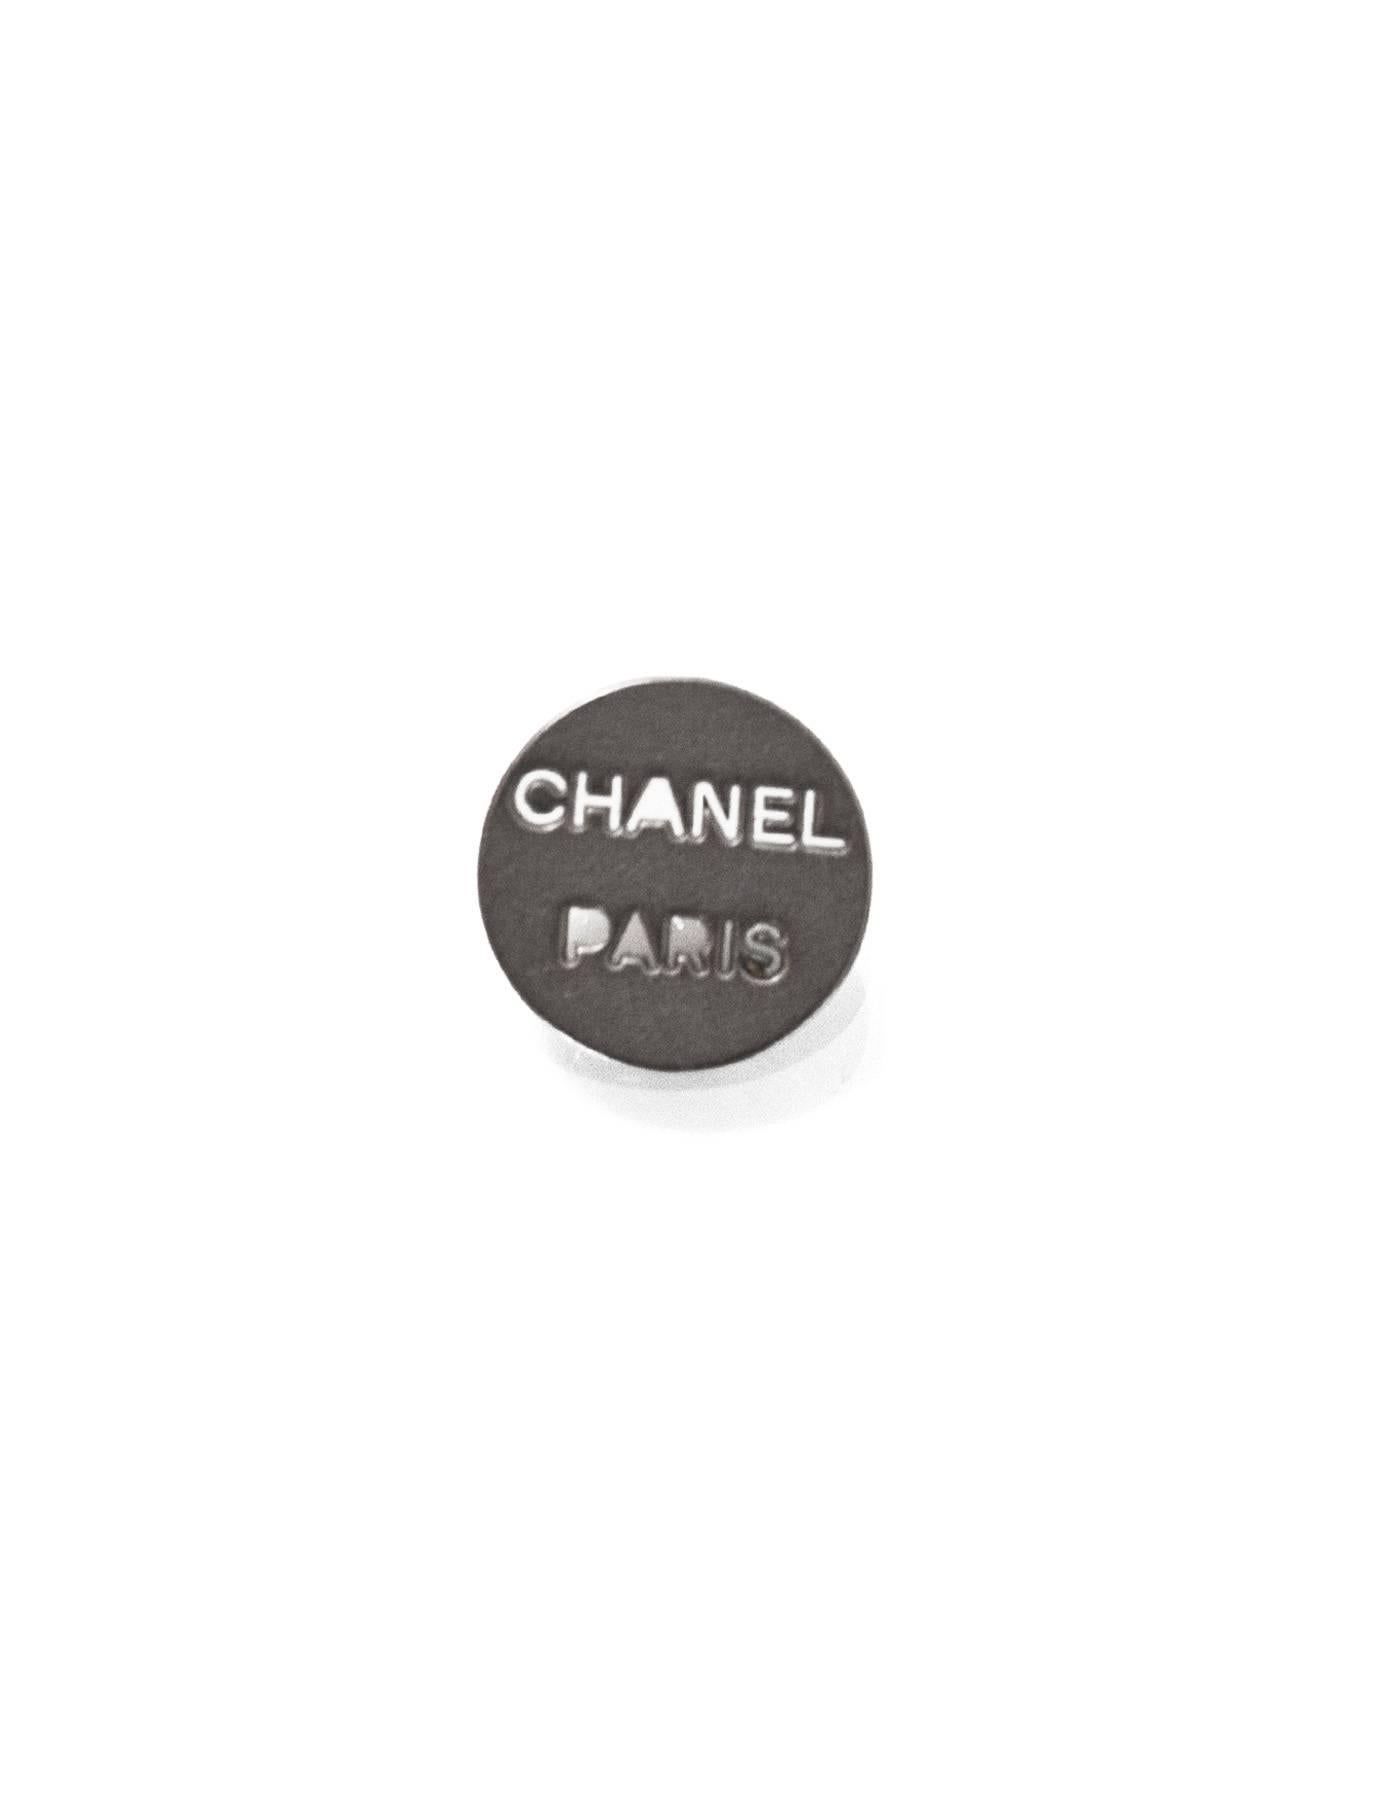 Chanel Silvertone CHANEL PARIS Buttons
Features one 16mm button and one 18mm button

Color: Silver
Hardware: Silvertone
Materials: Metal
Stamp: Chanel Paris
Overall Condition: Excellent good pre-owned condition, light surface marks

Measurements: